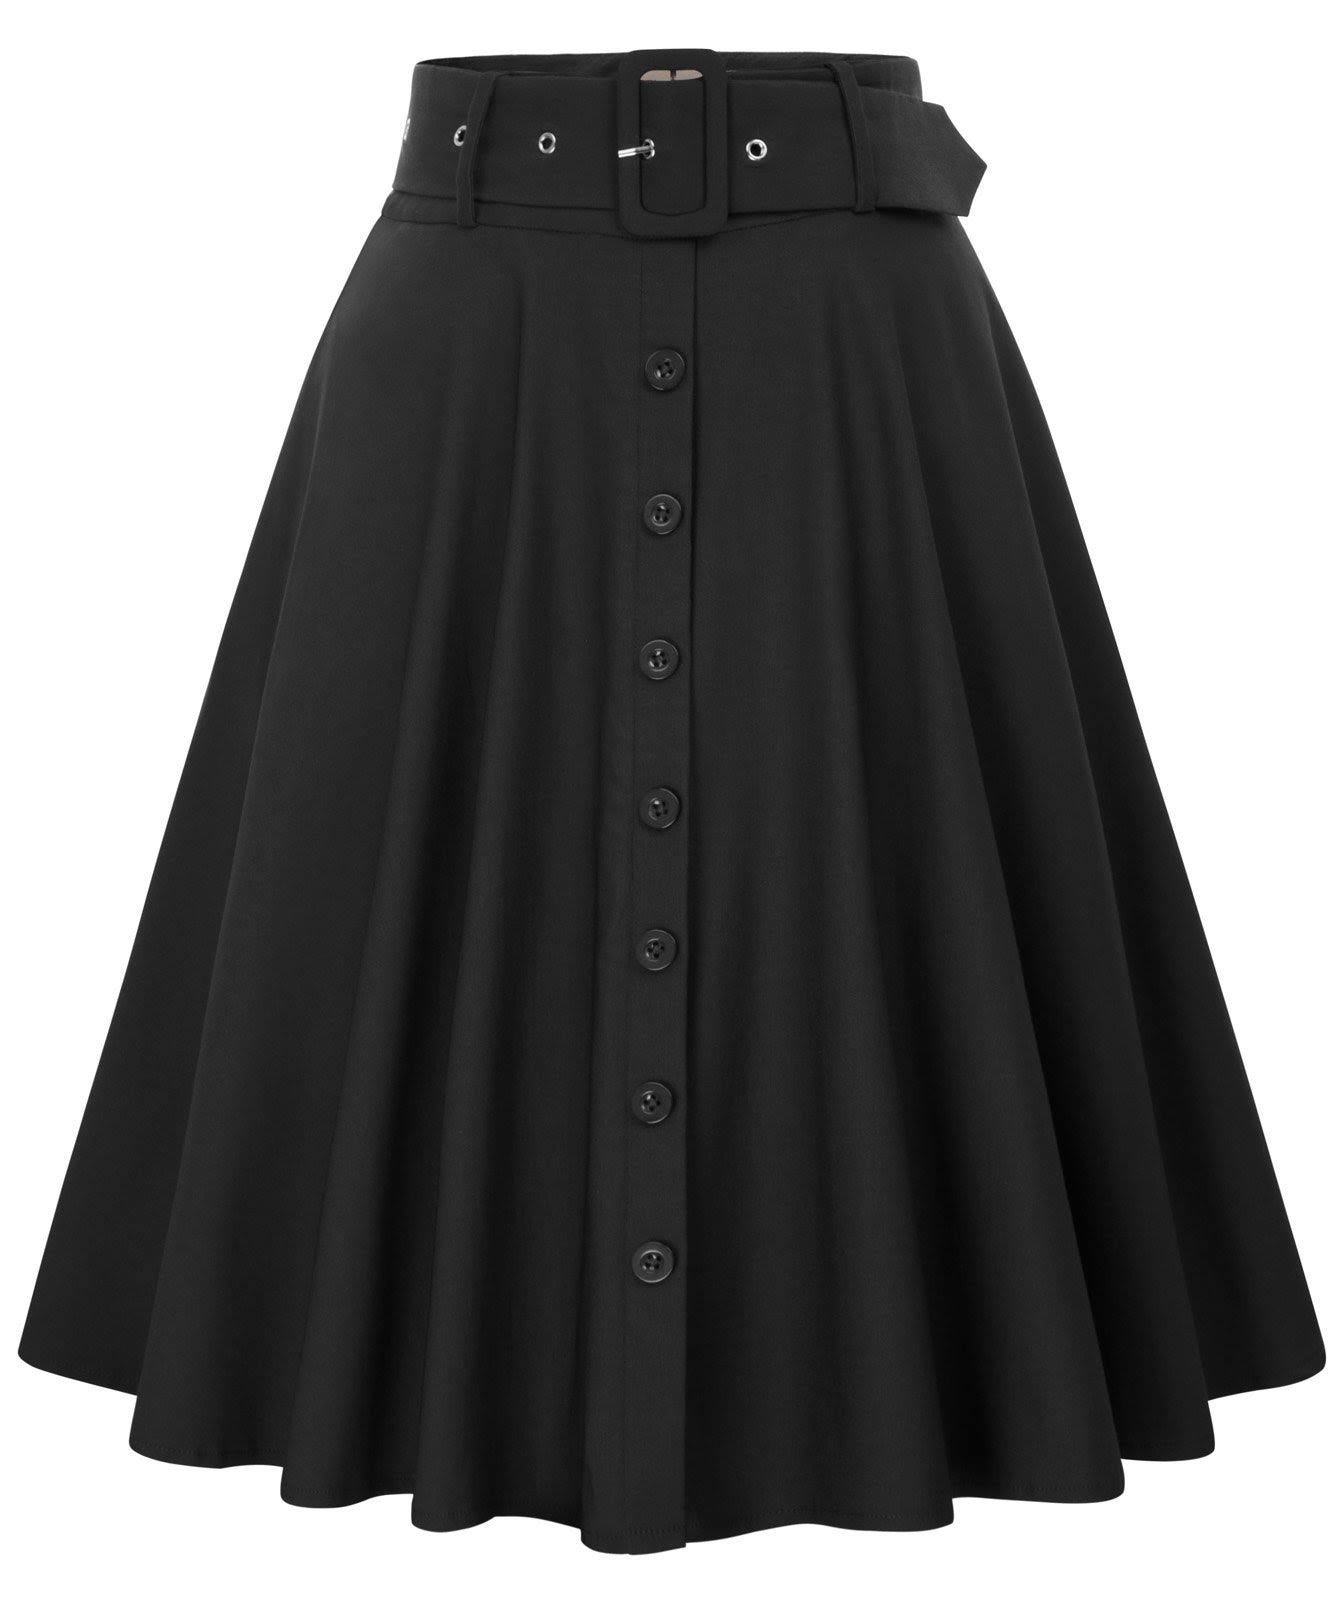 Flared Midi Skirt with Concealed Zipper and Pockets | Image